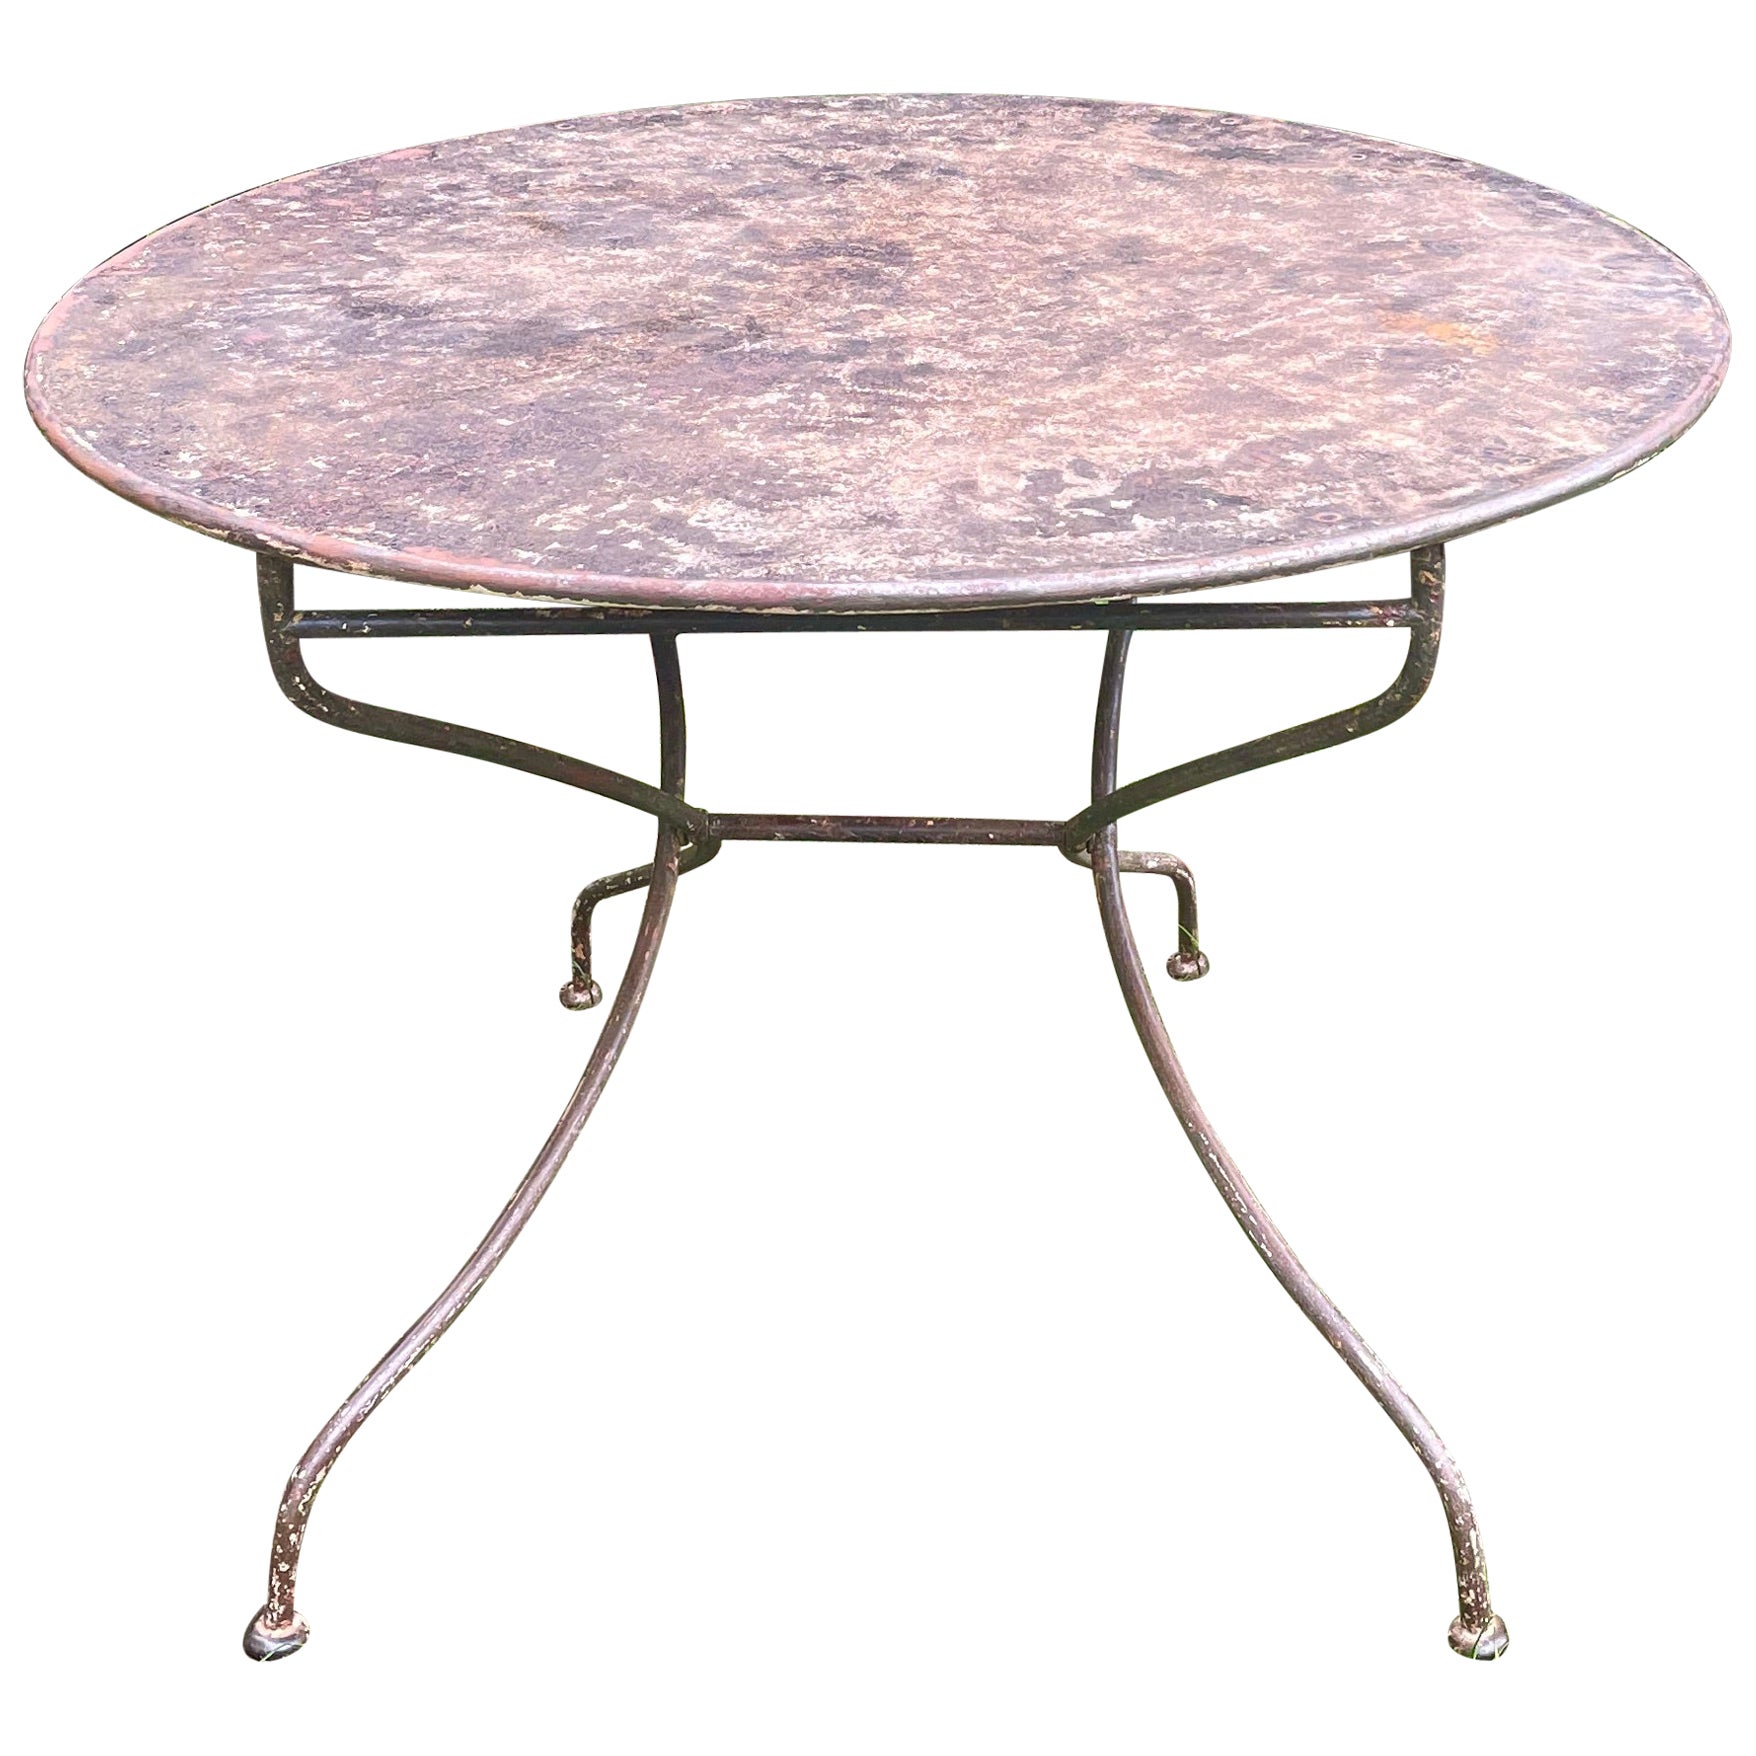 Early 20th C French Wrought Iron Folding Bistro Table